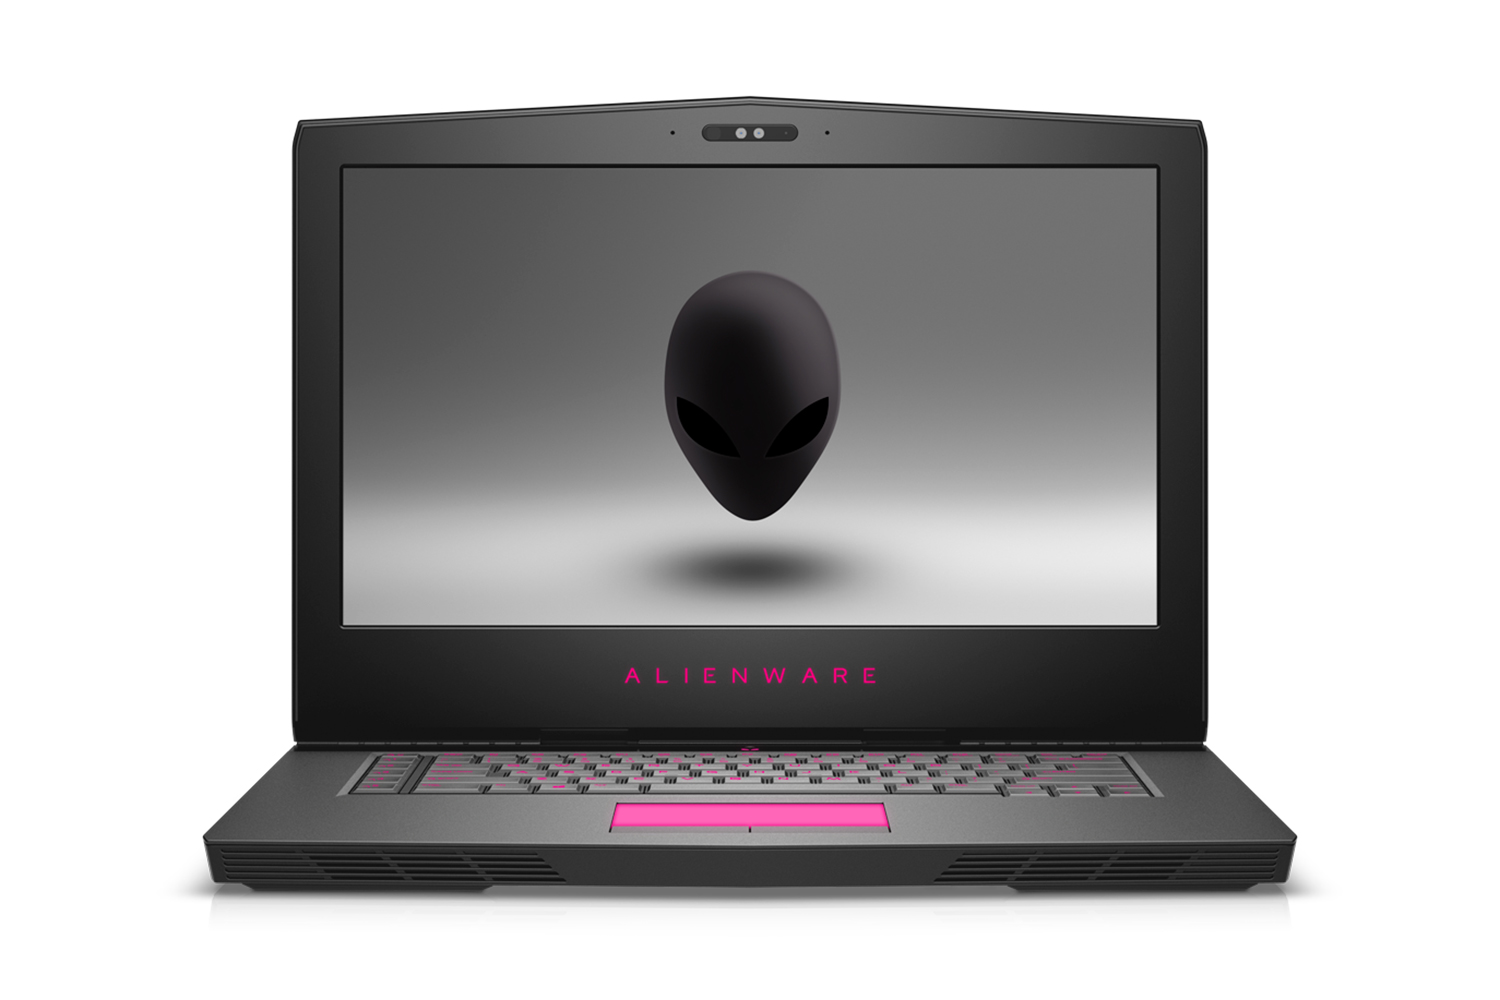 dell alienware inspiron 7000 gaming laptops refresh intel seventh gen cpu aw 15 09